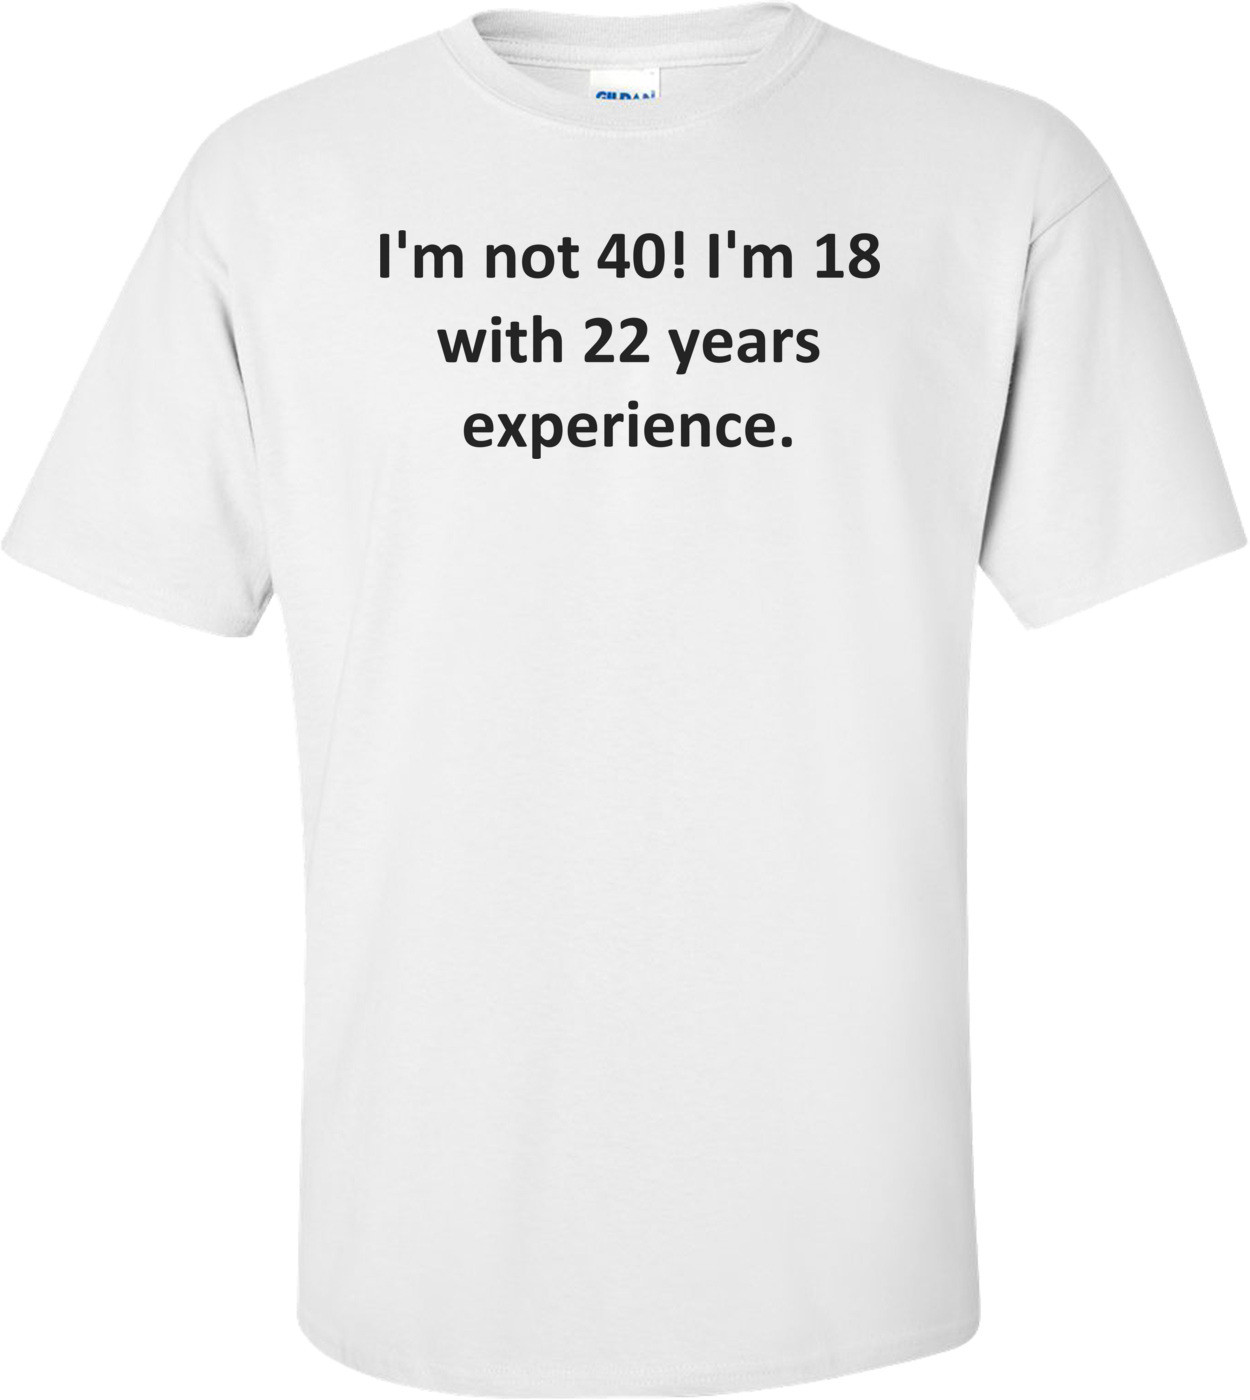 I'm not 40! I'm 18 with 22 years experience.